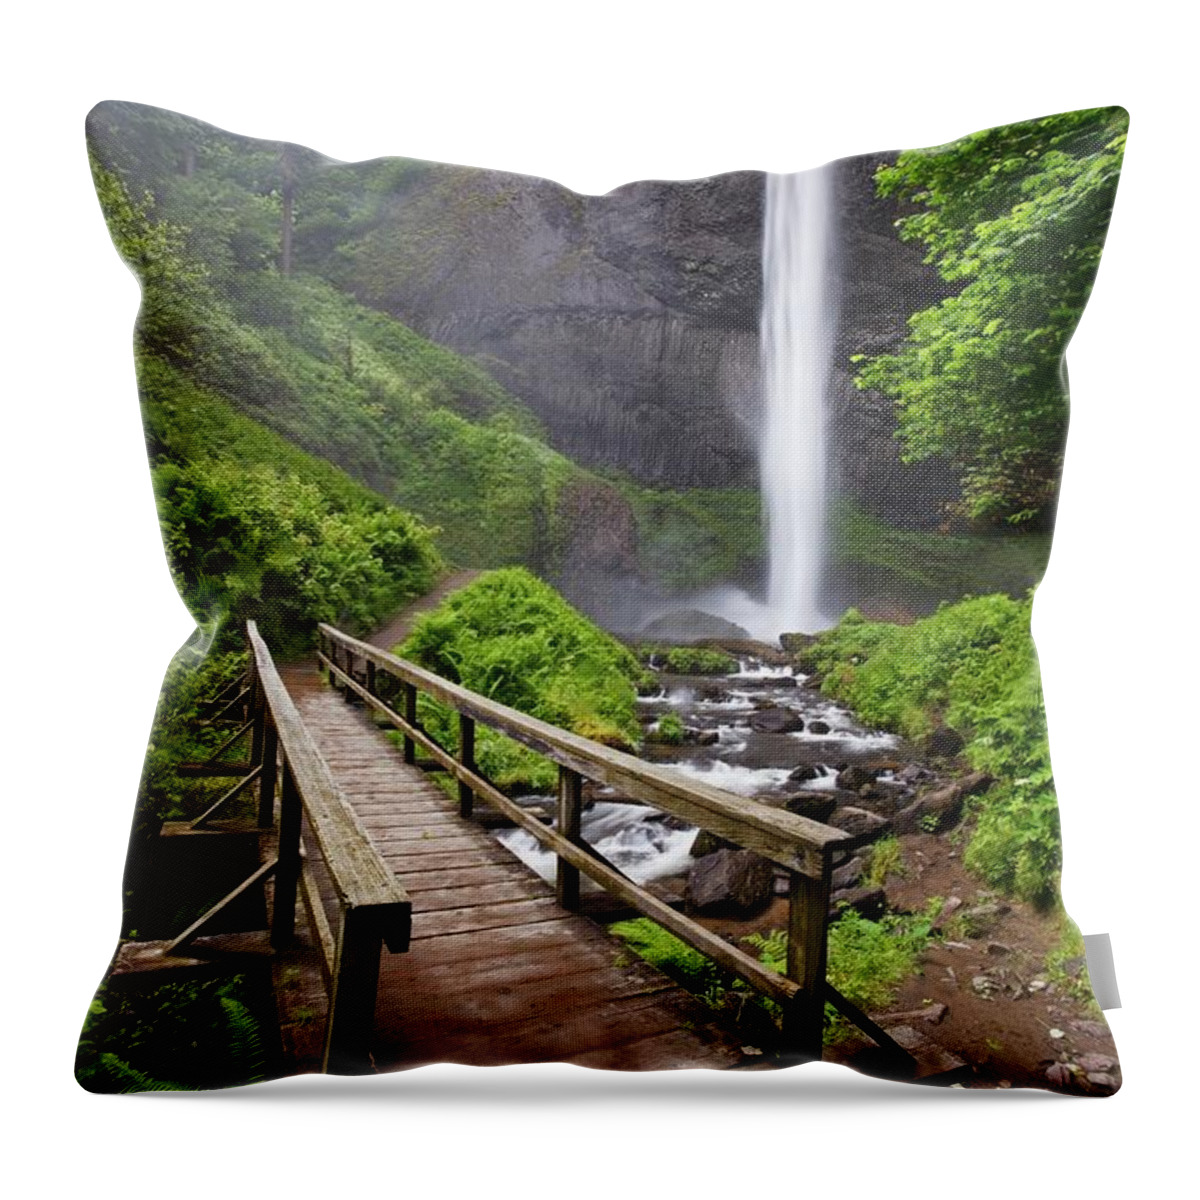 Outdoors Throw Pillow featuring the photograph Oregon, United States Of America by Design Pics / Craig Tuttle